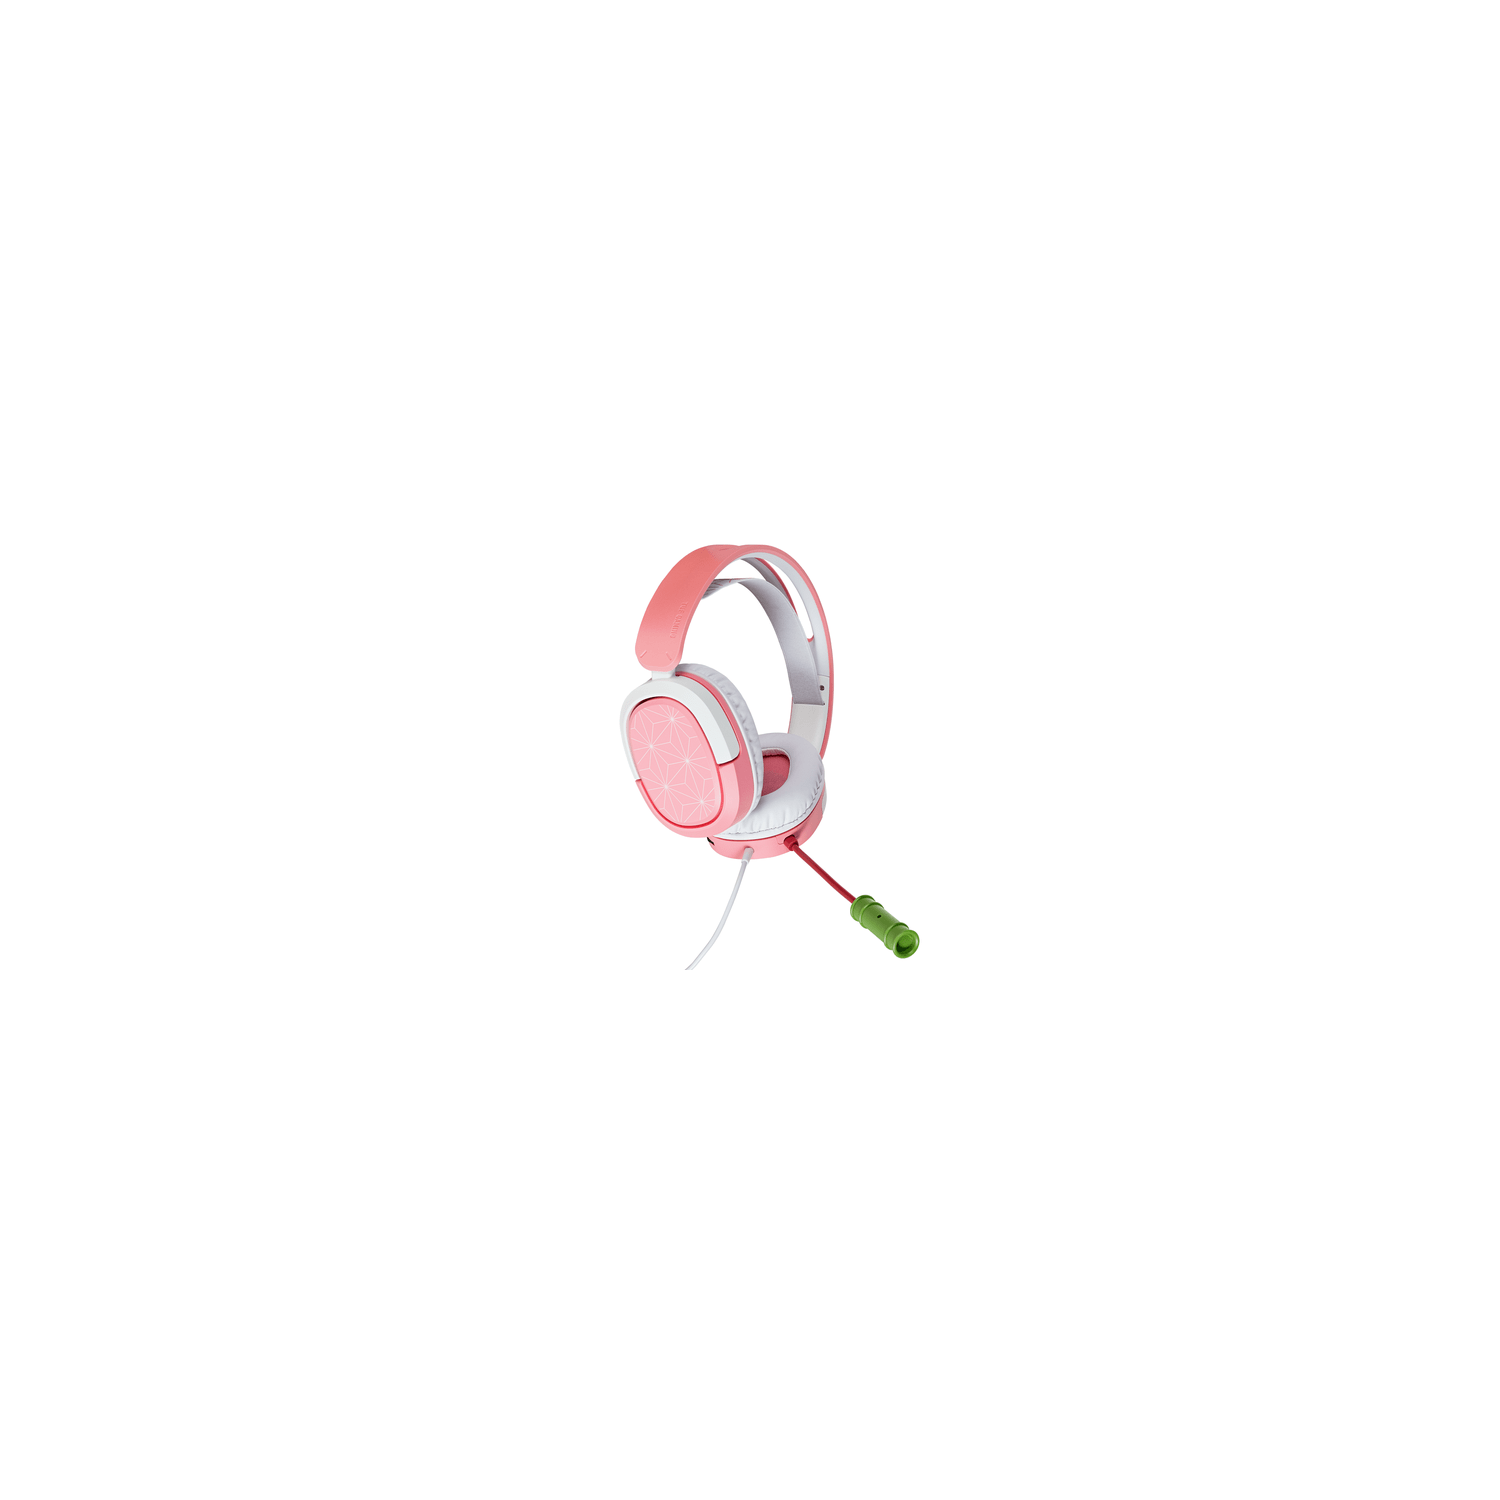 Asus TUF Gaming H1 Wired Jack 3.5mm Over Ear Microphone Pink Headphone & Headset